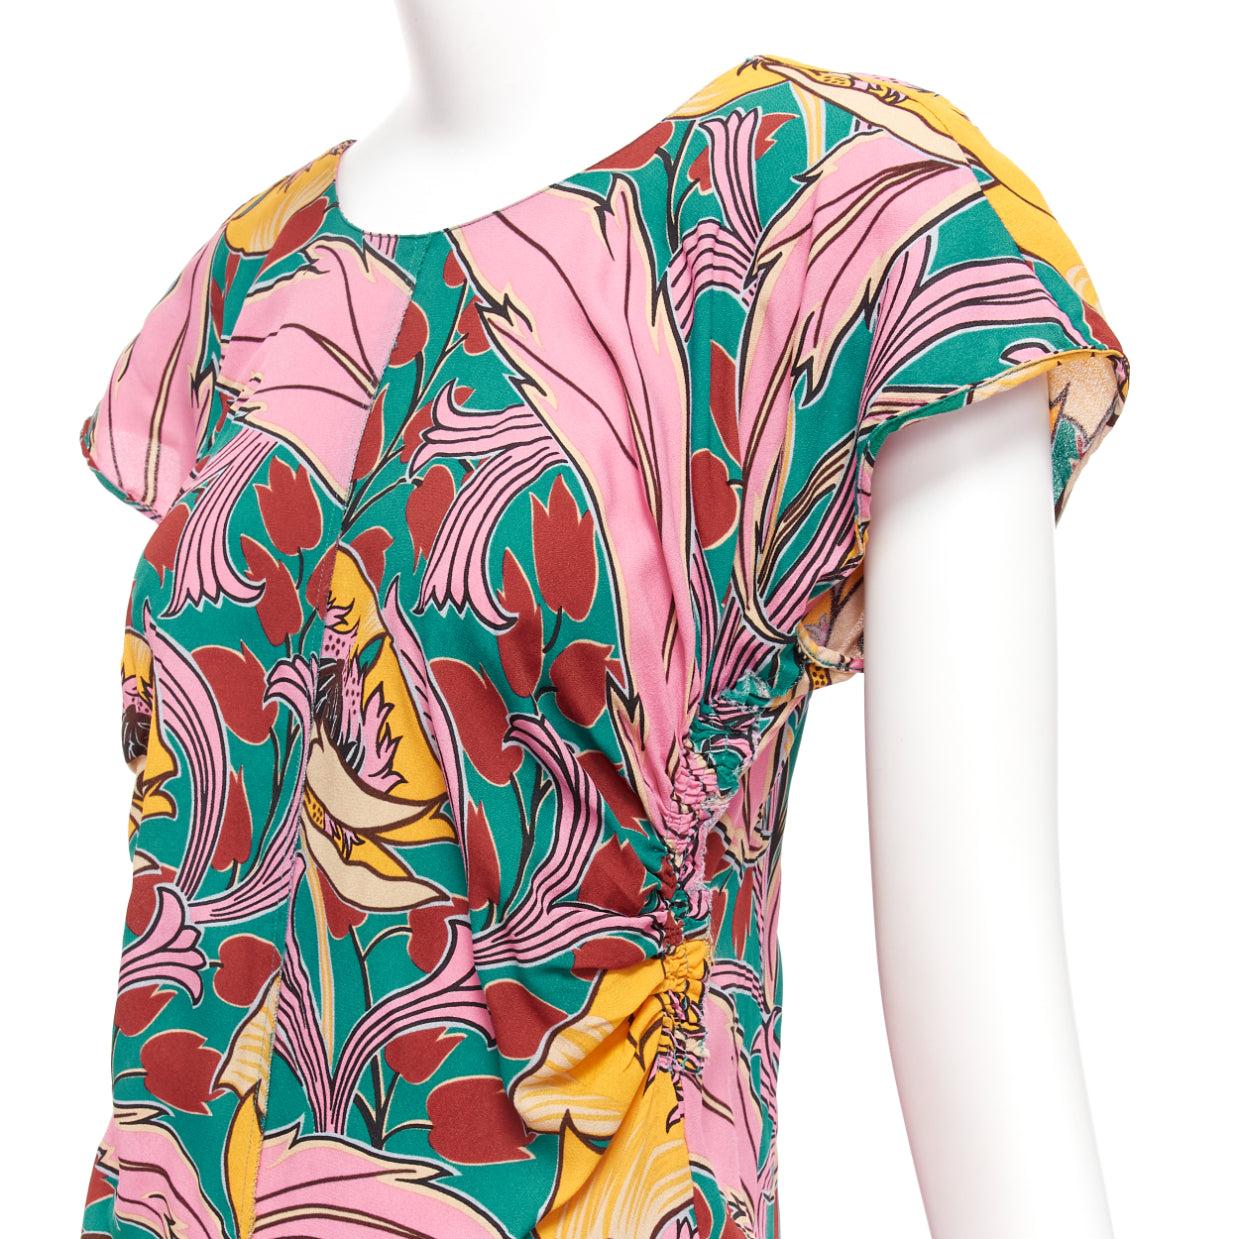 MARNI pink green floral illustration print gathered side cap sleeve top IT38 XS
Reference: CELG/A00323
Brand: Marni
Material: Viscose
Color: Multicolour
Pattern: Floral
Closure: Slip On
Extra Details: Gathered side seam. Back V neck.
Made in: